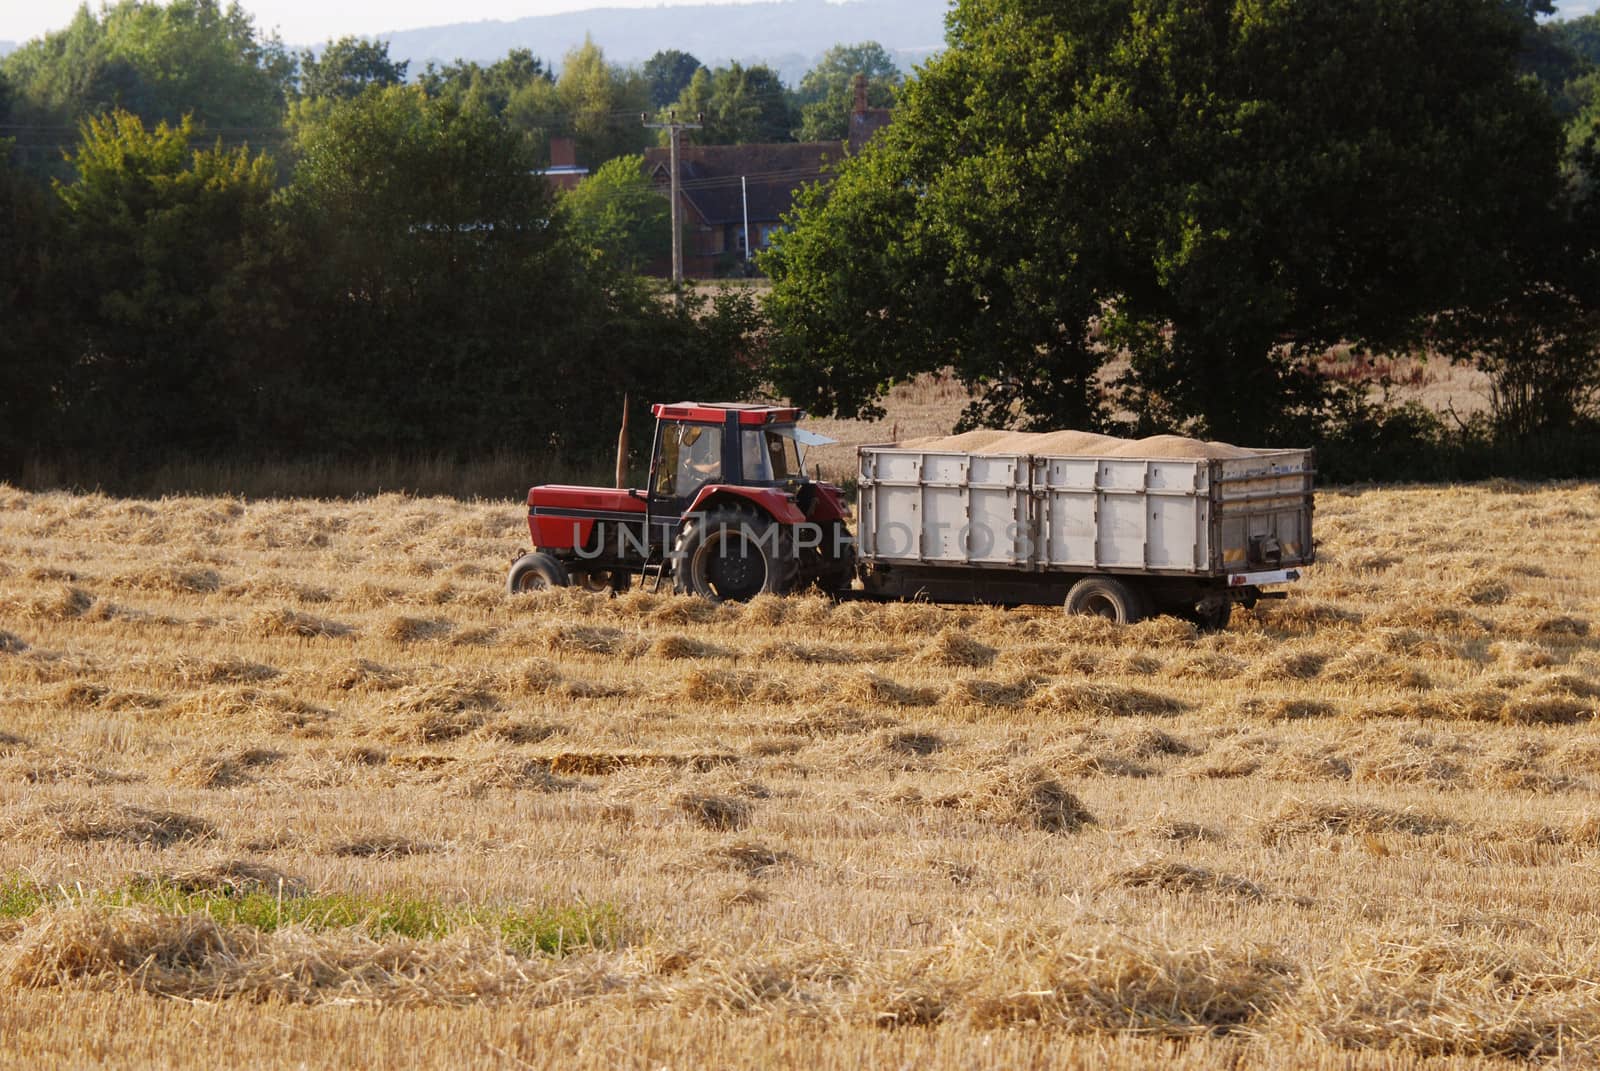 Tractor with a trailer full of grain in the field at harvest time